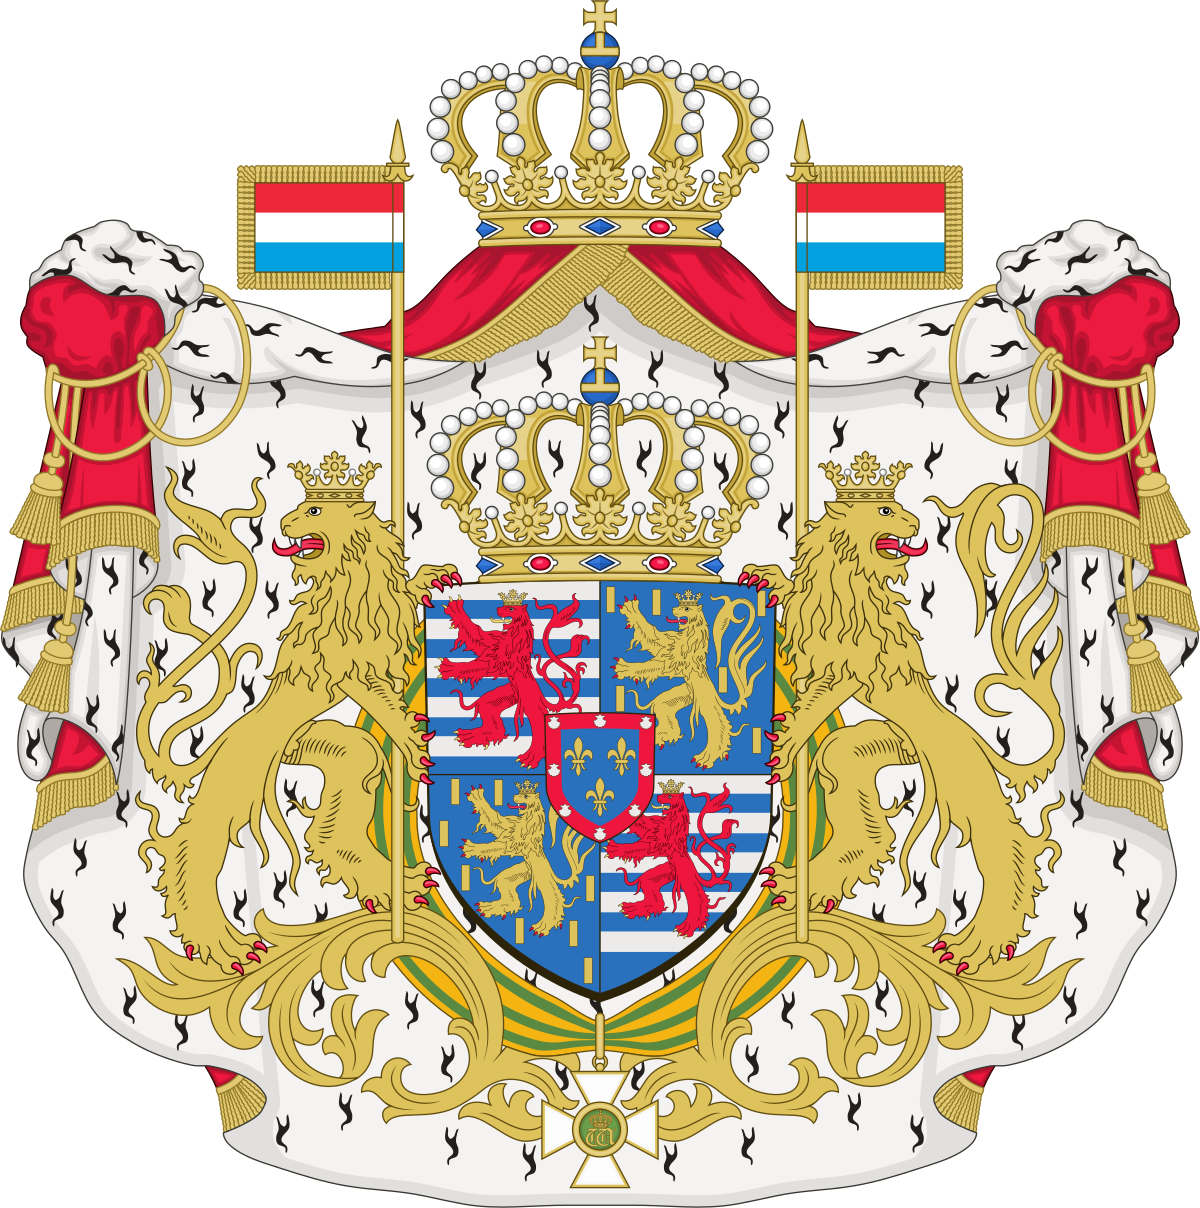 A Coat Of Arms With A Crown And Lions